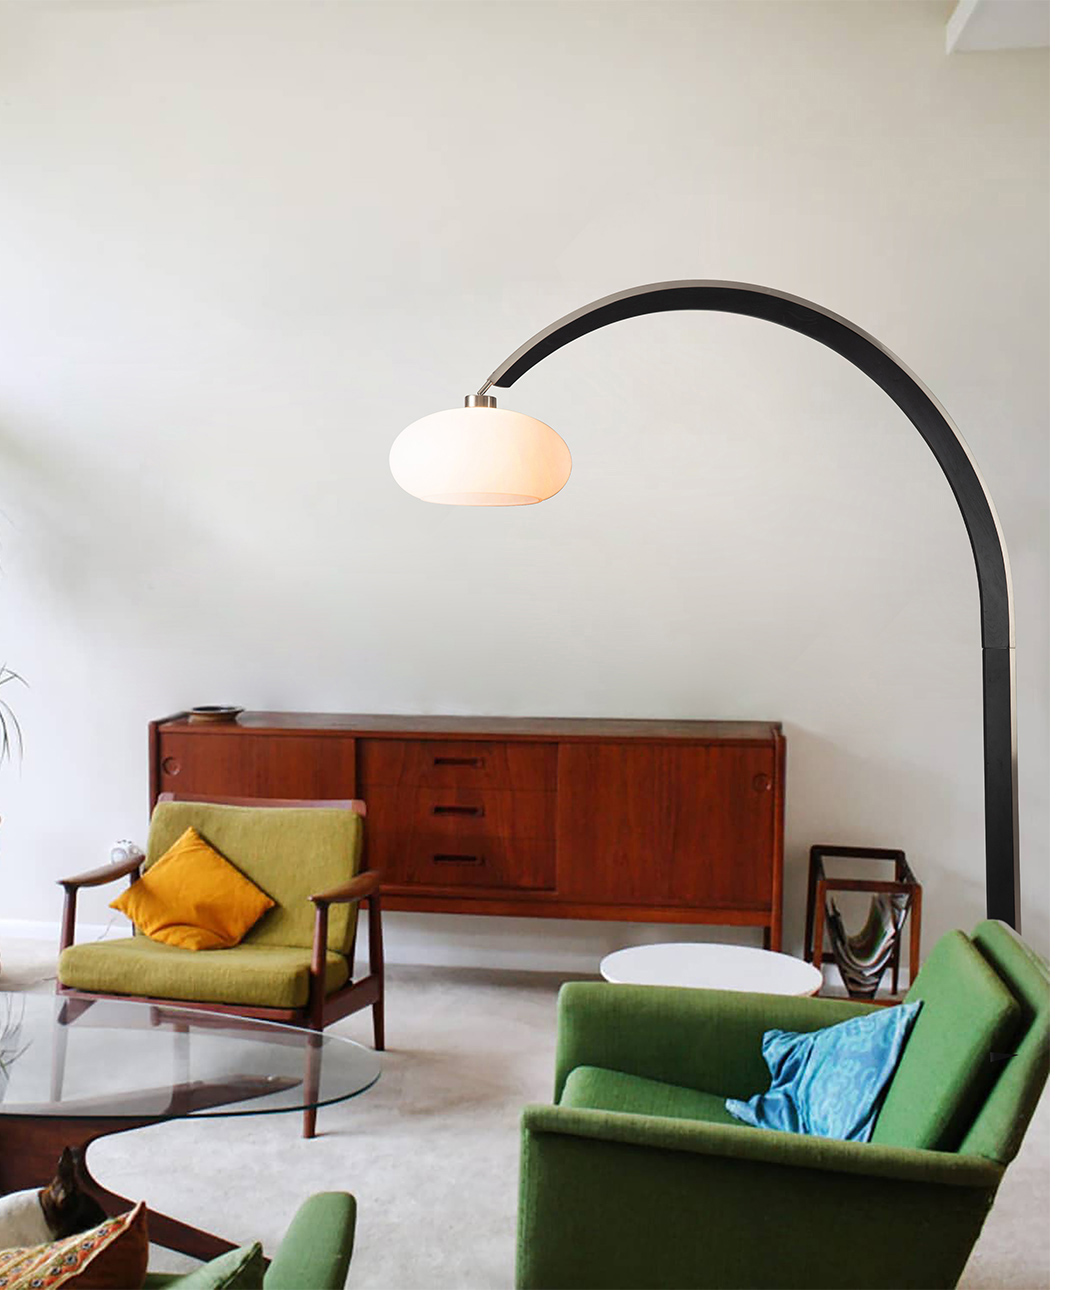 Vaulted 86″ Arc Lamp in Satin Nickel and Espresso with Dimmer Switch designed by Peter Morelli in 1968